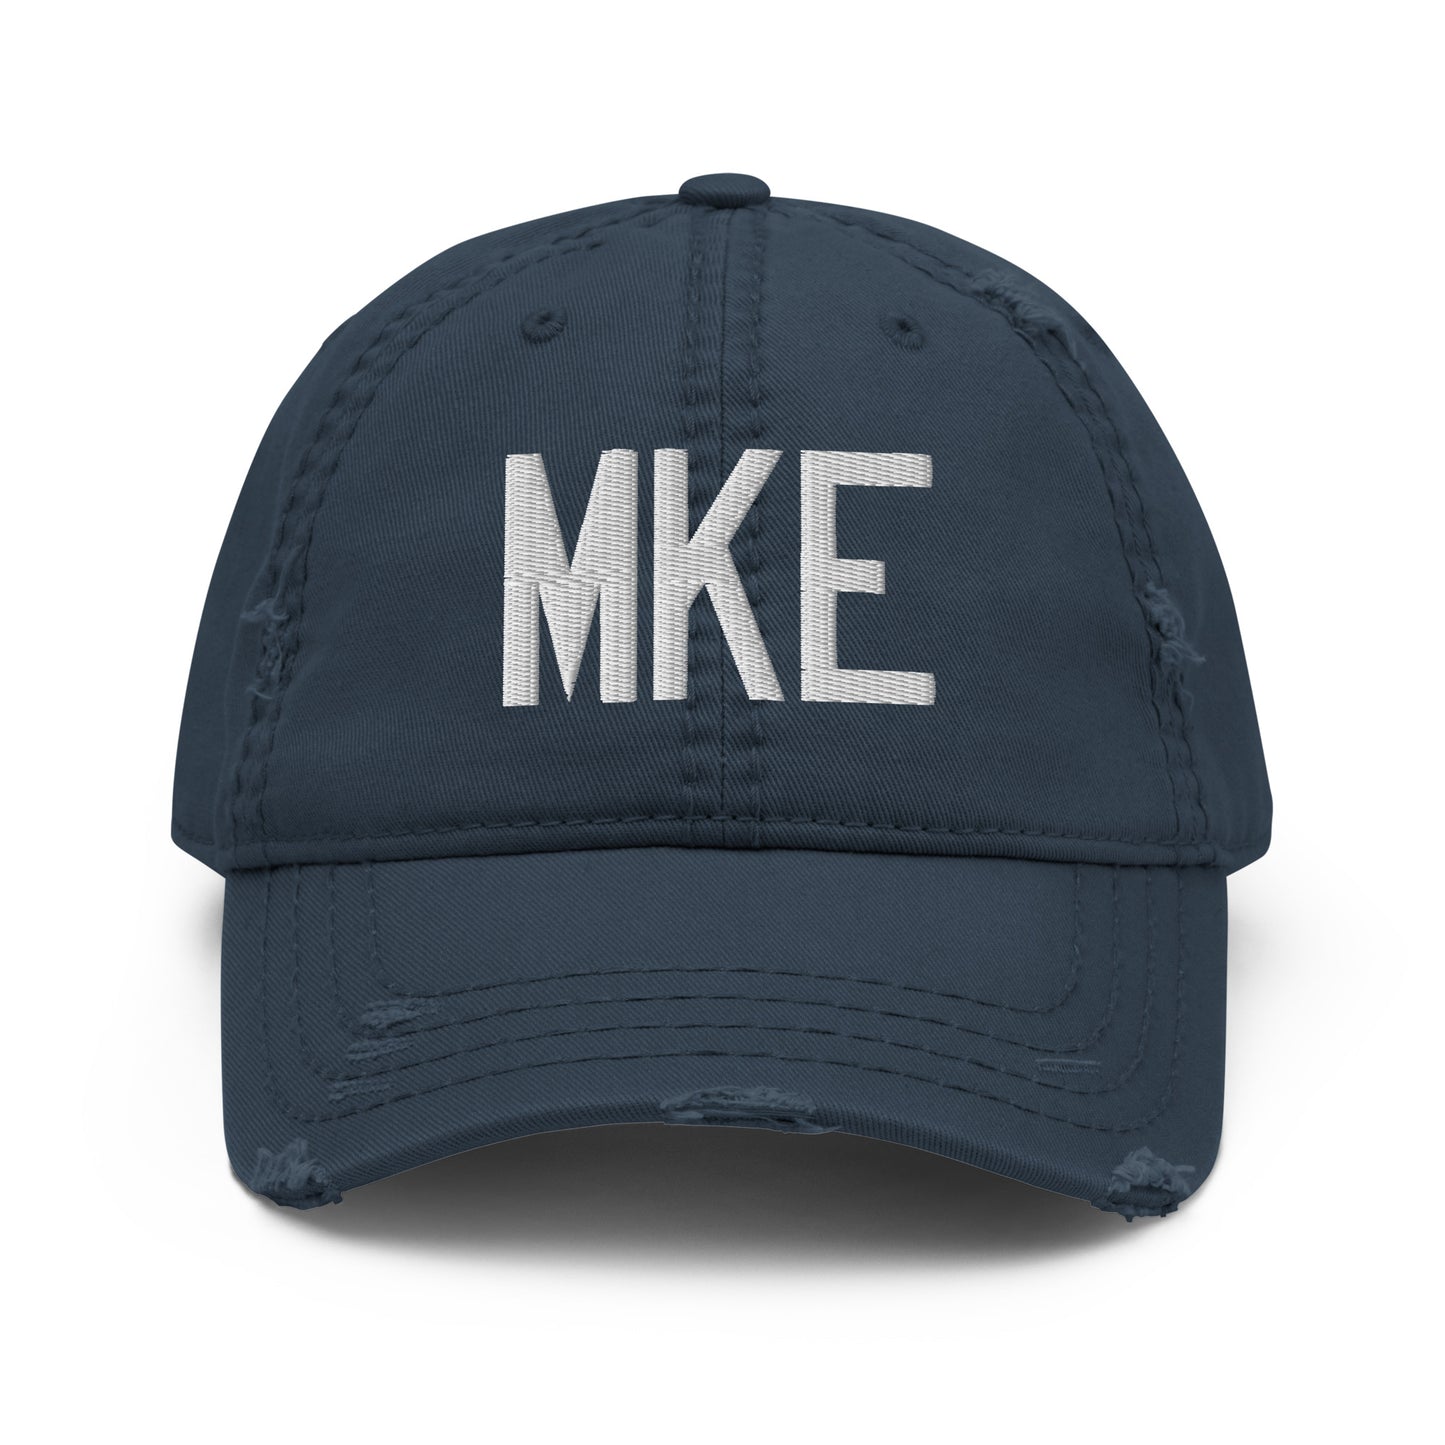 Airport Code Distressed Hat - White • MKE Milwaukee • YHM Designs - Image 13